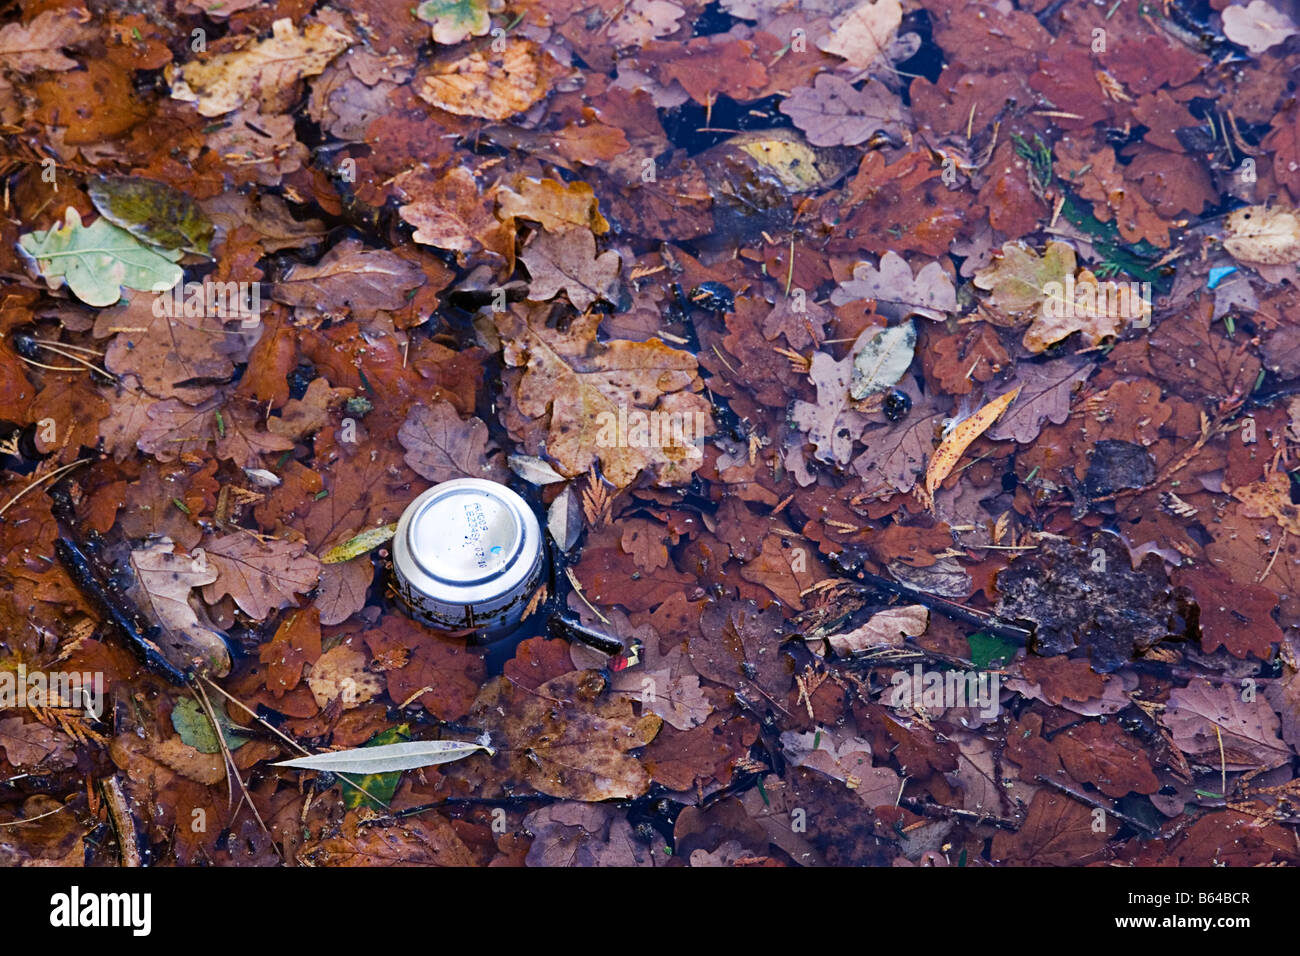 A discarded can floating amongst leaves Stock Photo